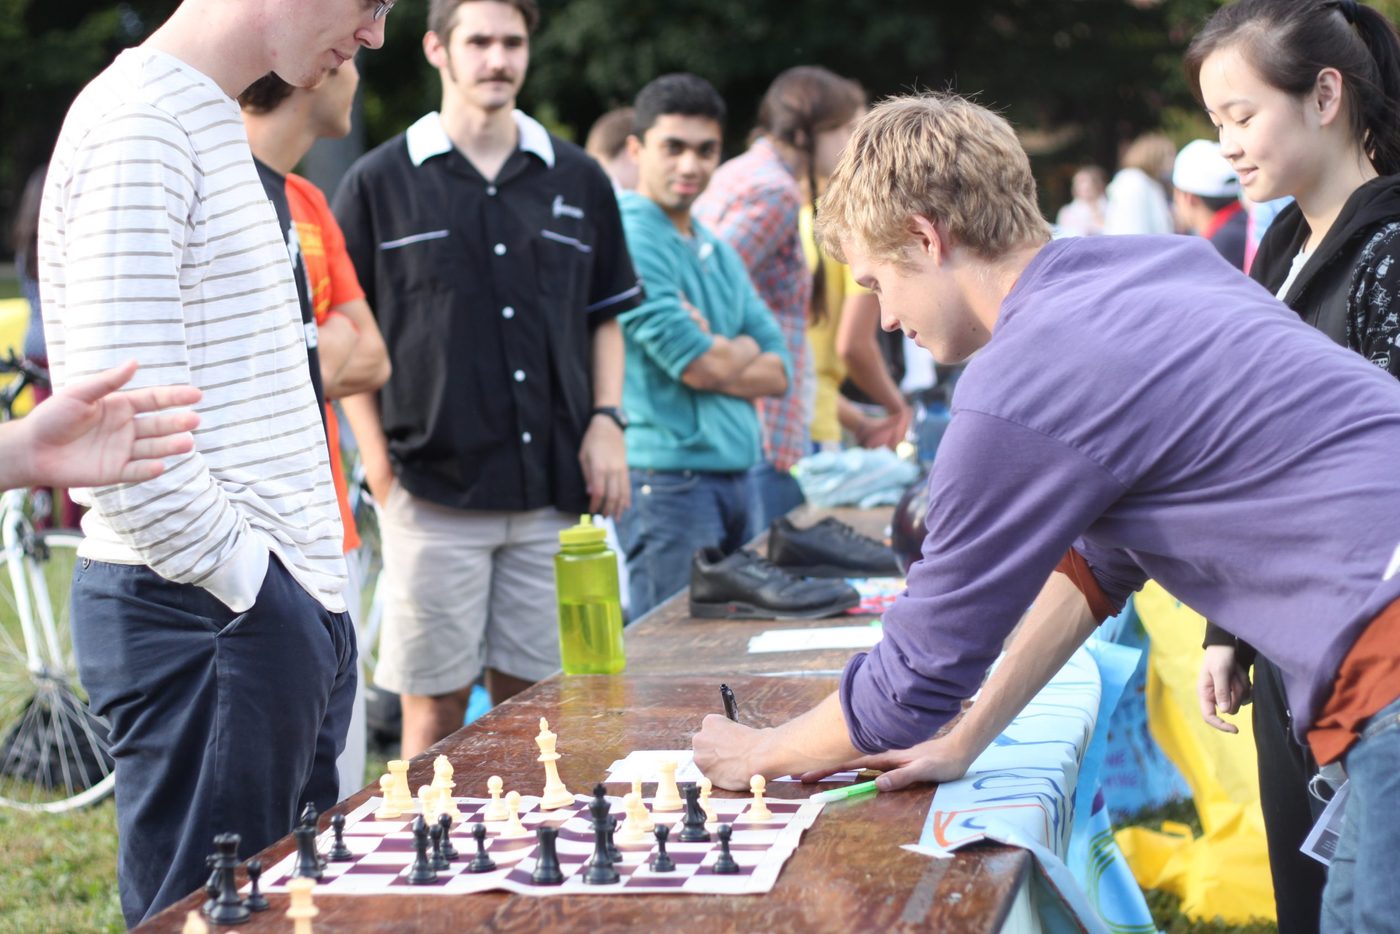 Students sign up for a chess org at the student org fair